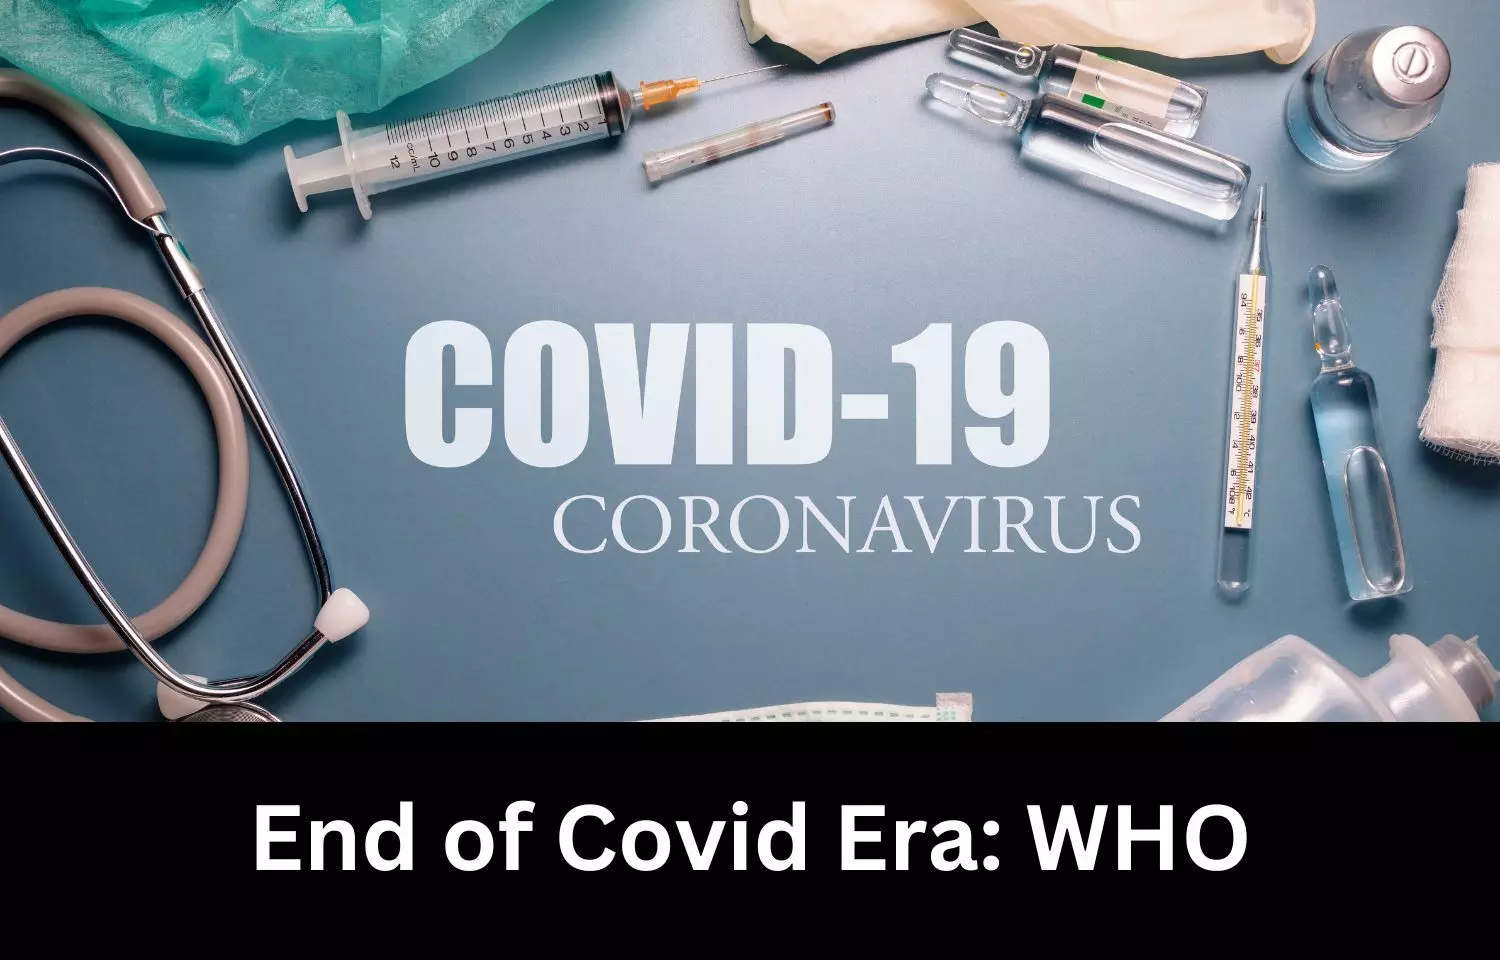 End of COVID pandemic is in sight: WHO